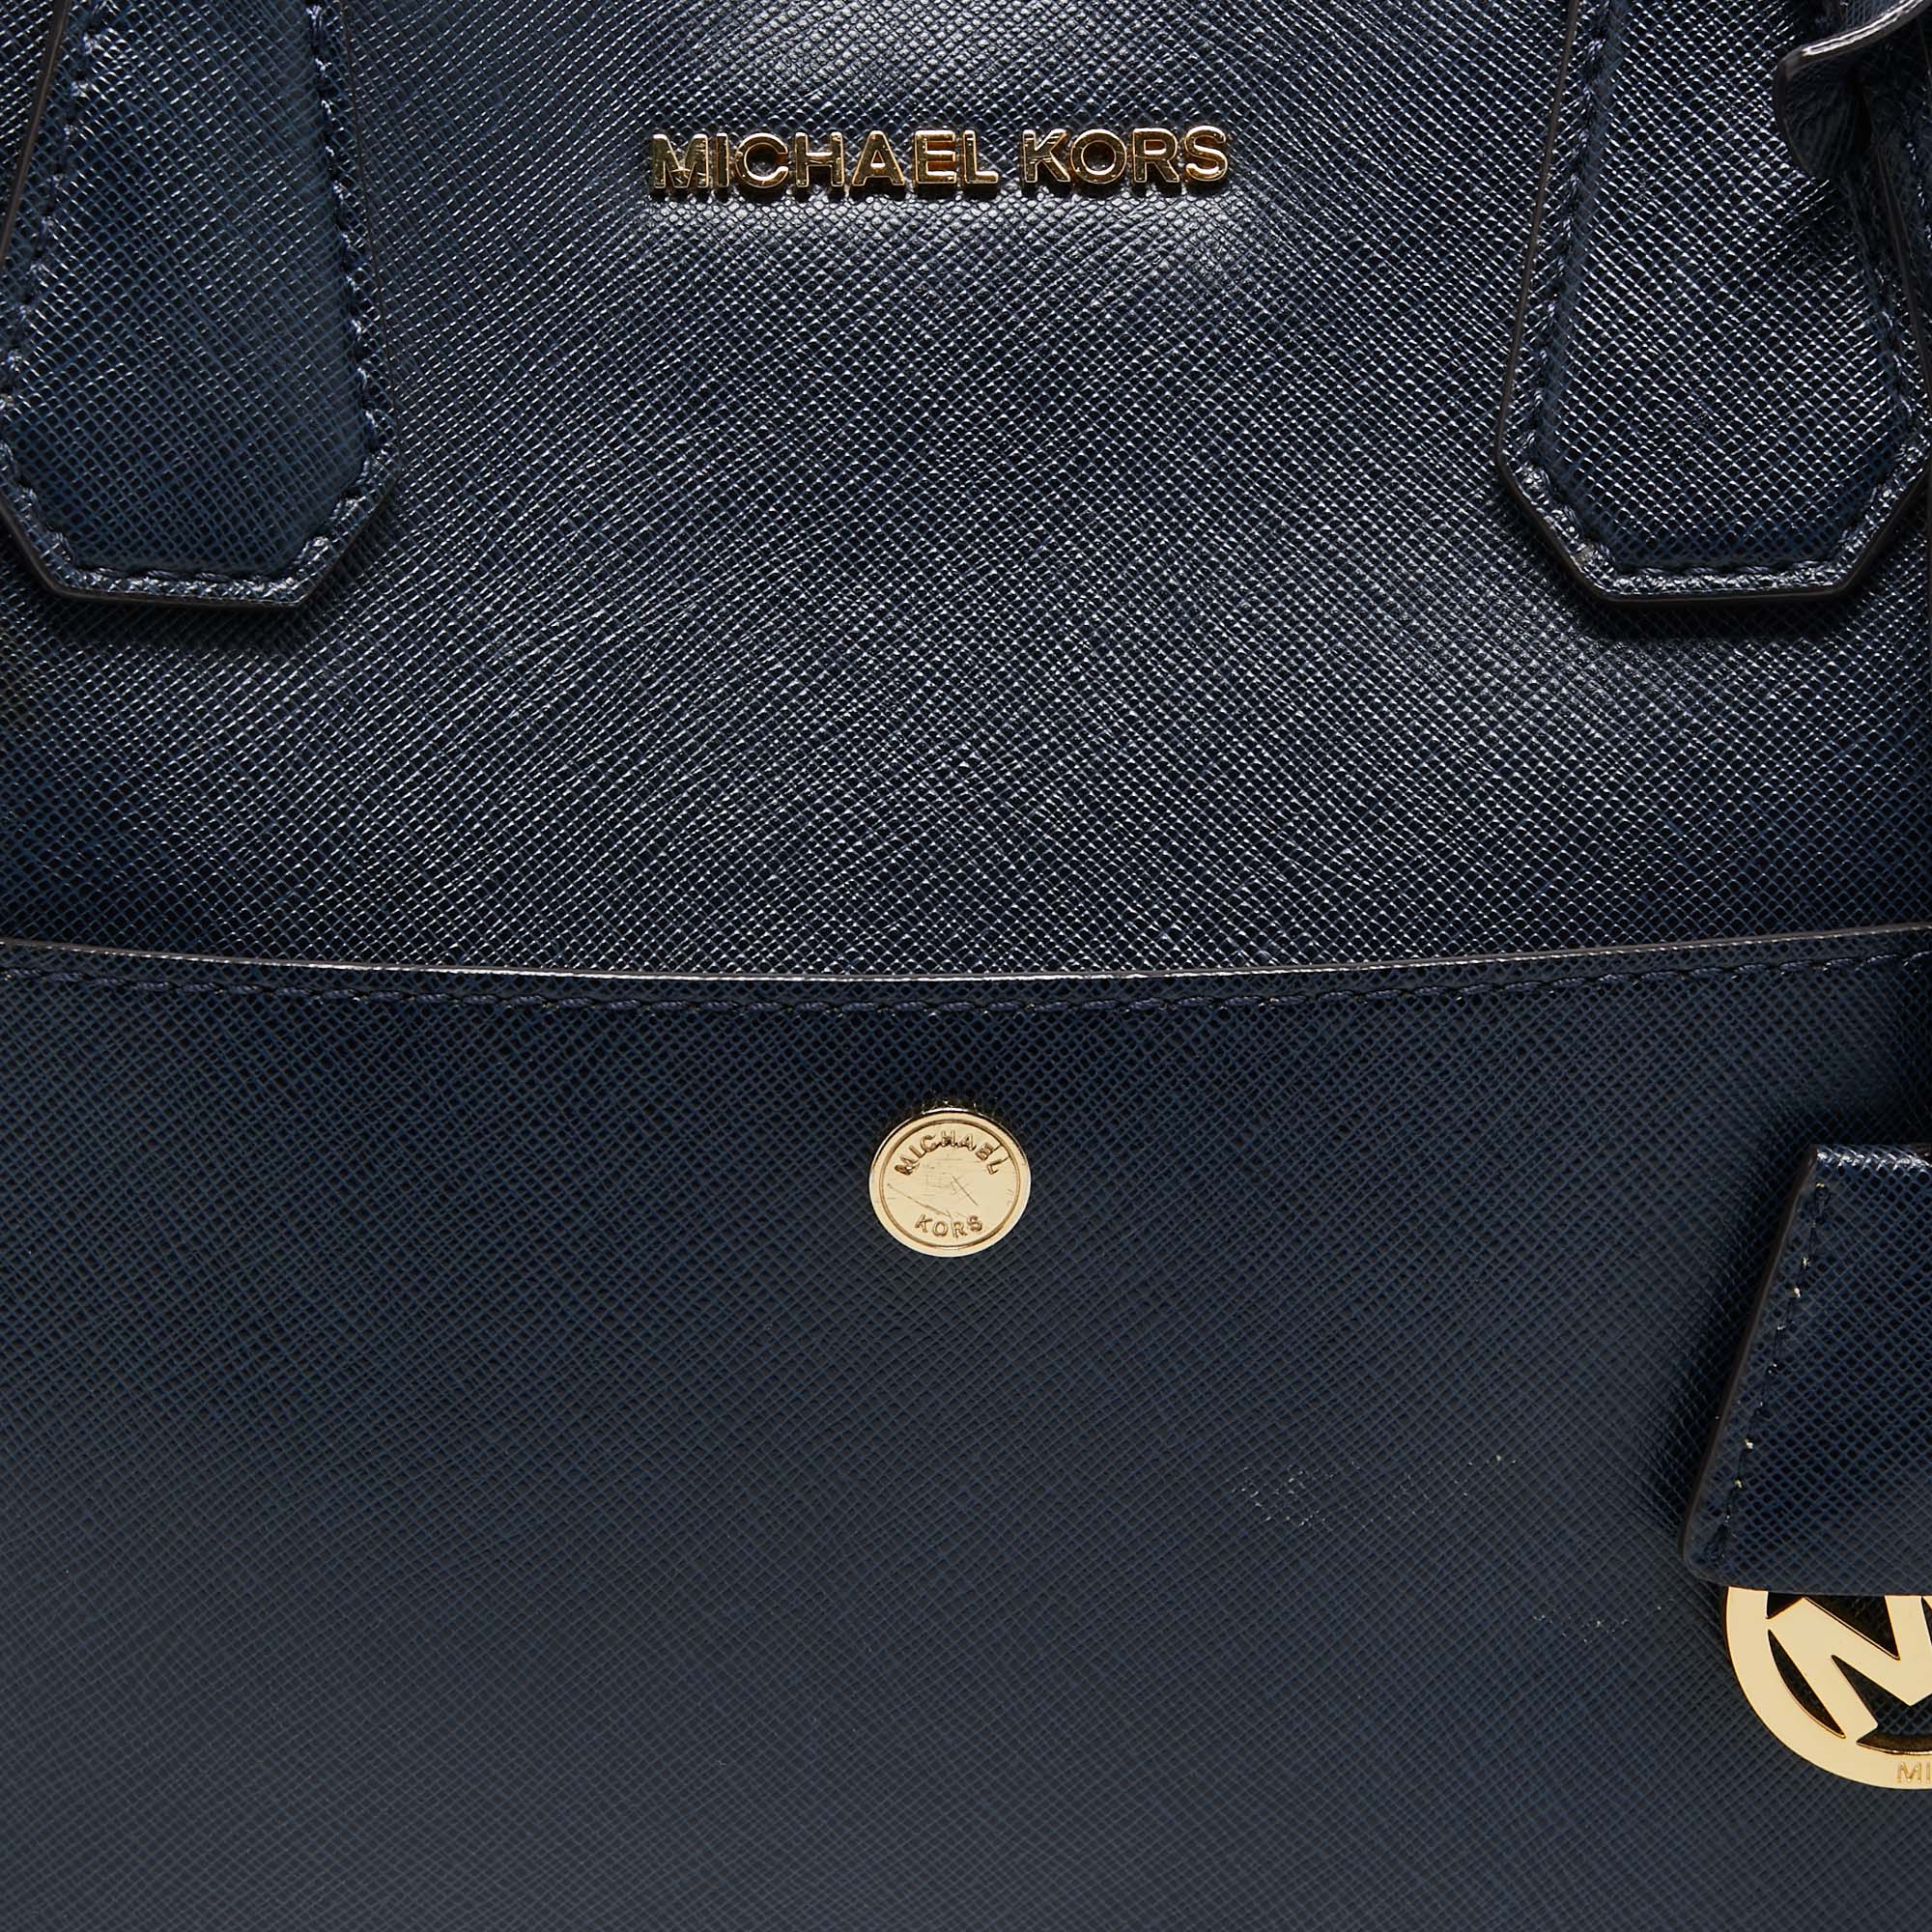 Michael Kors Navy Blue Leather Front Pocket Tote